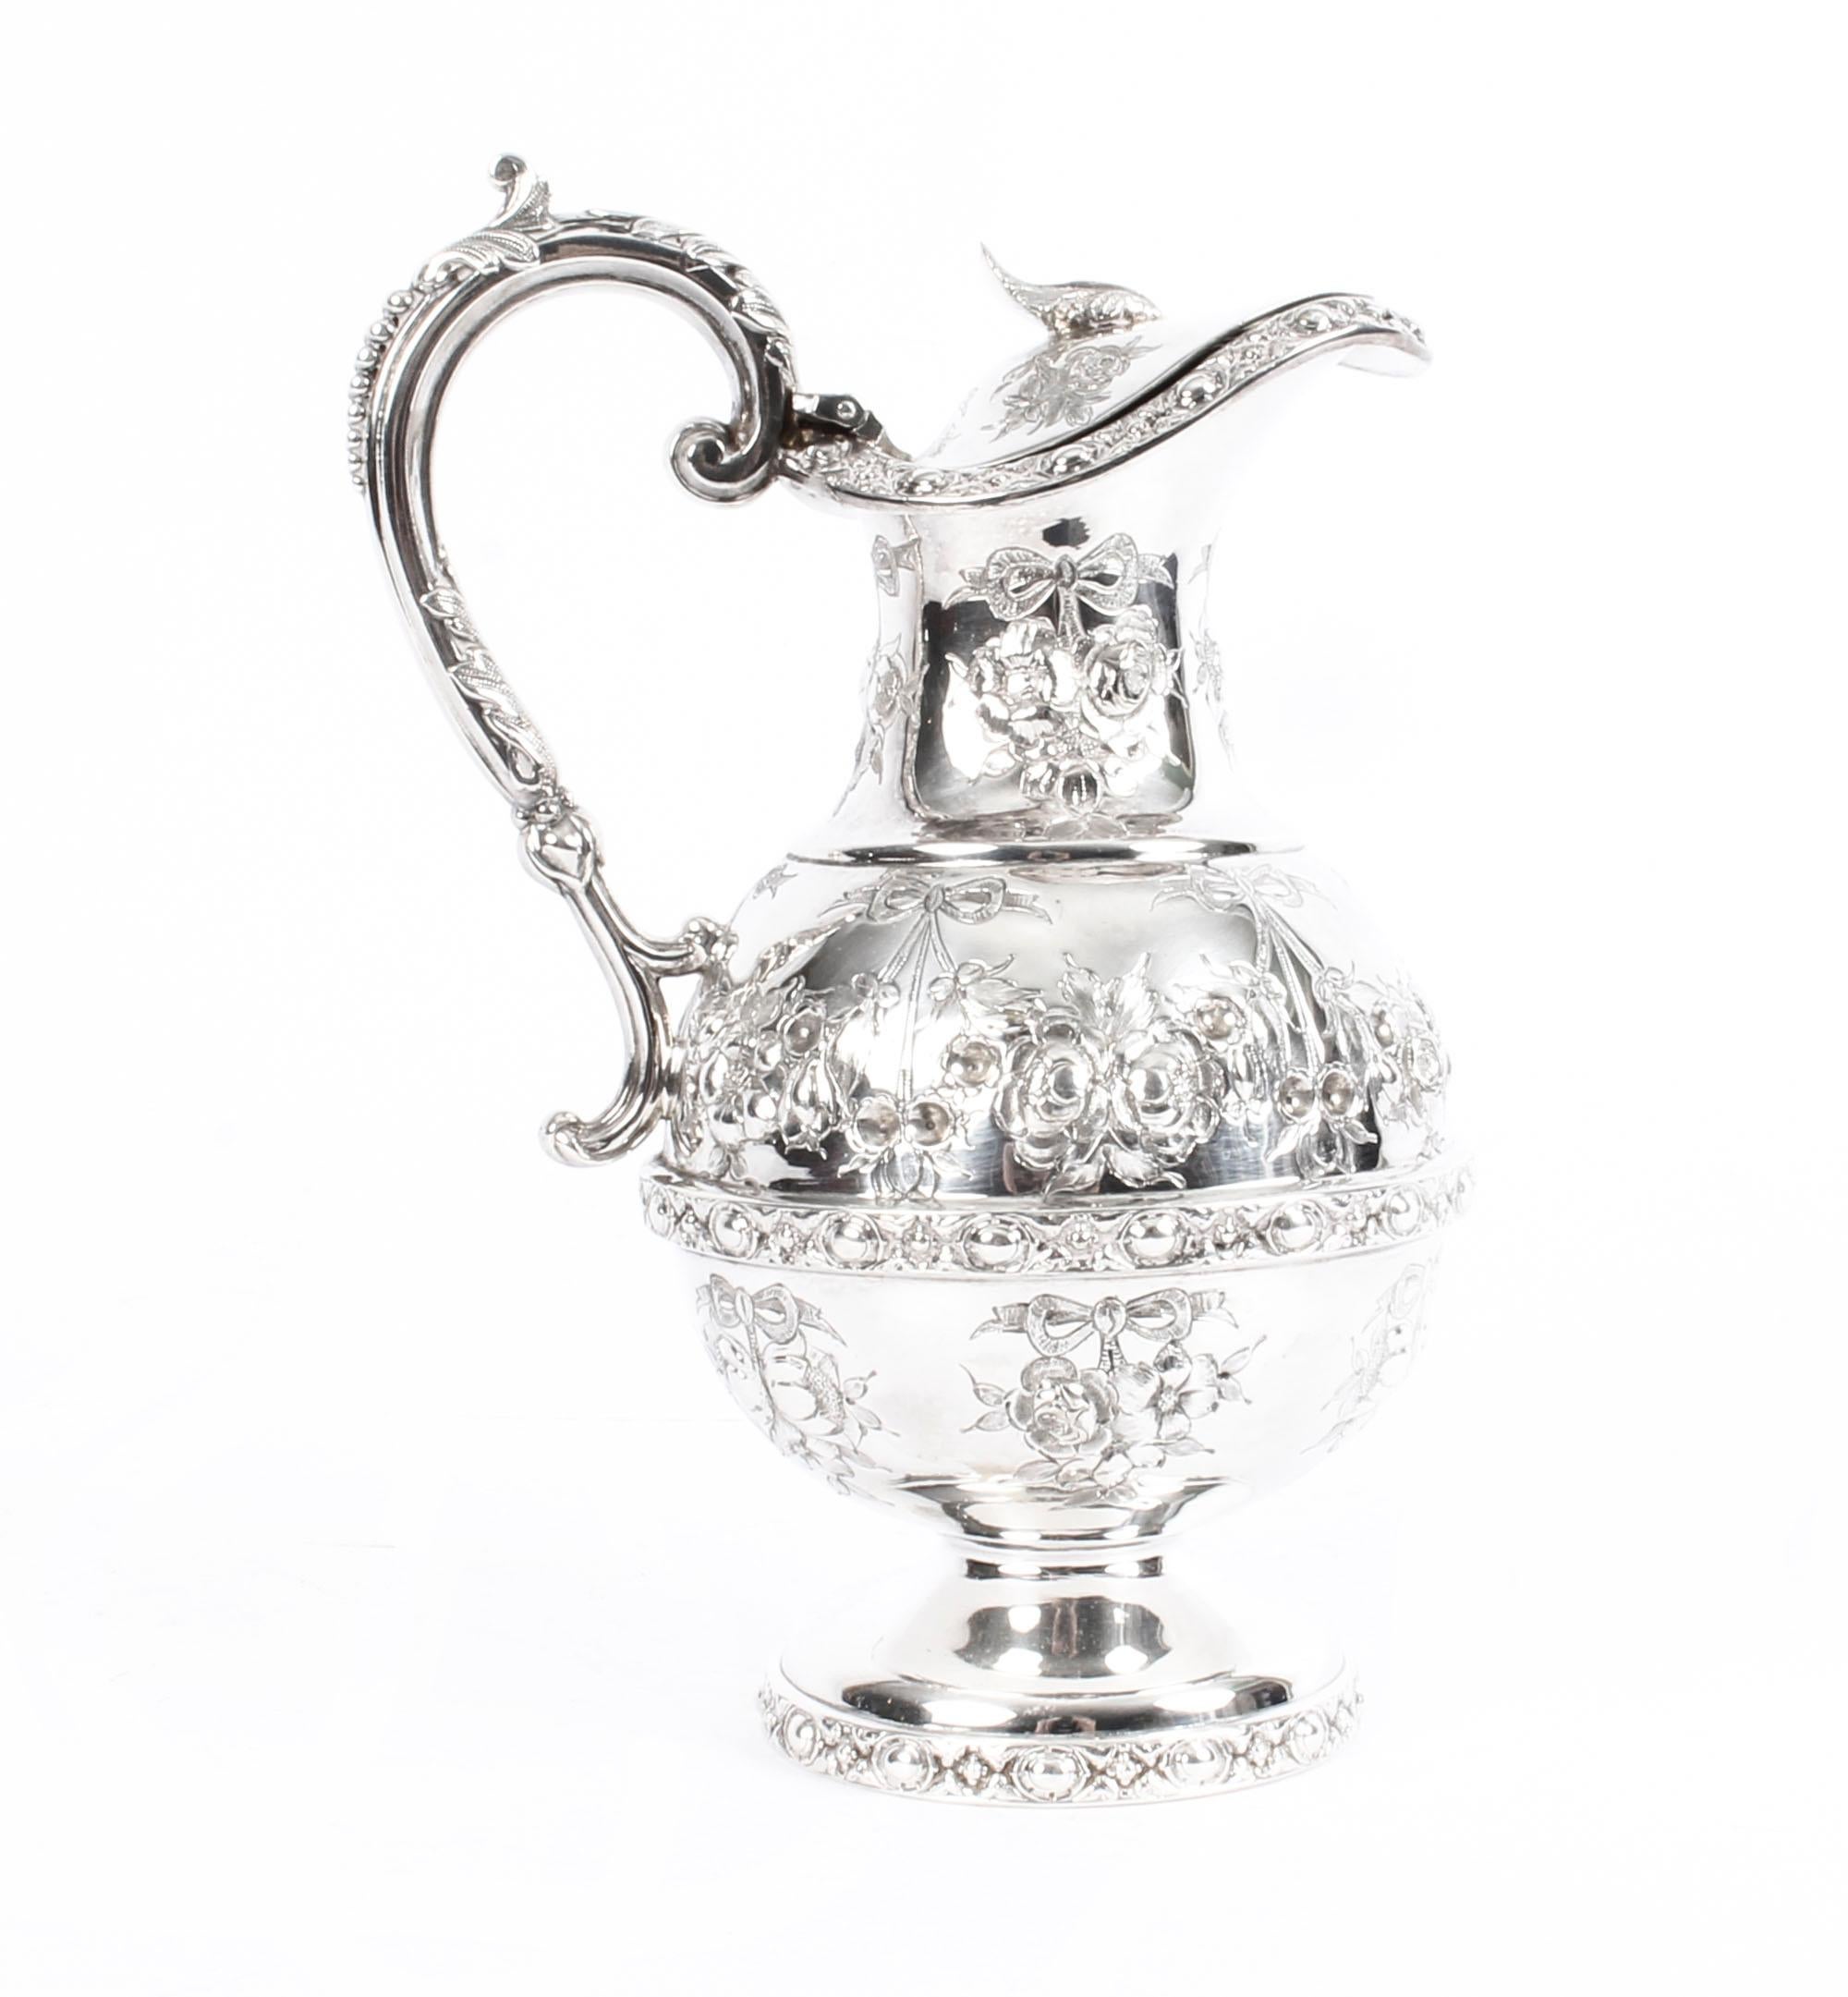 Antique Victorian Silver Plate Claret Jug by Martin Hall, 19th Century 4